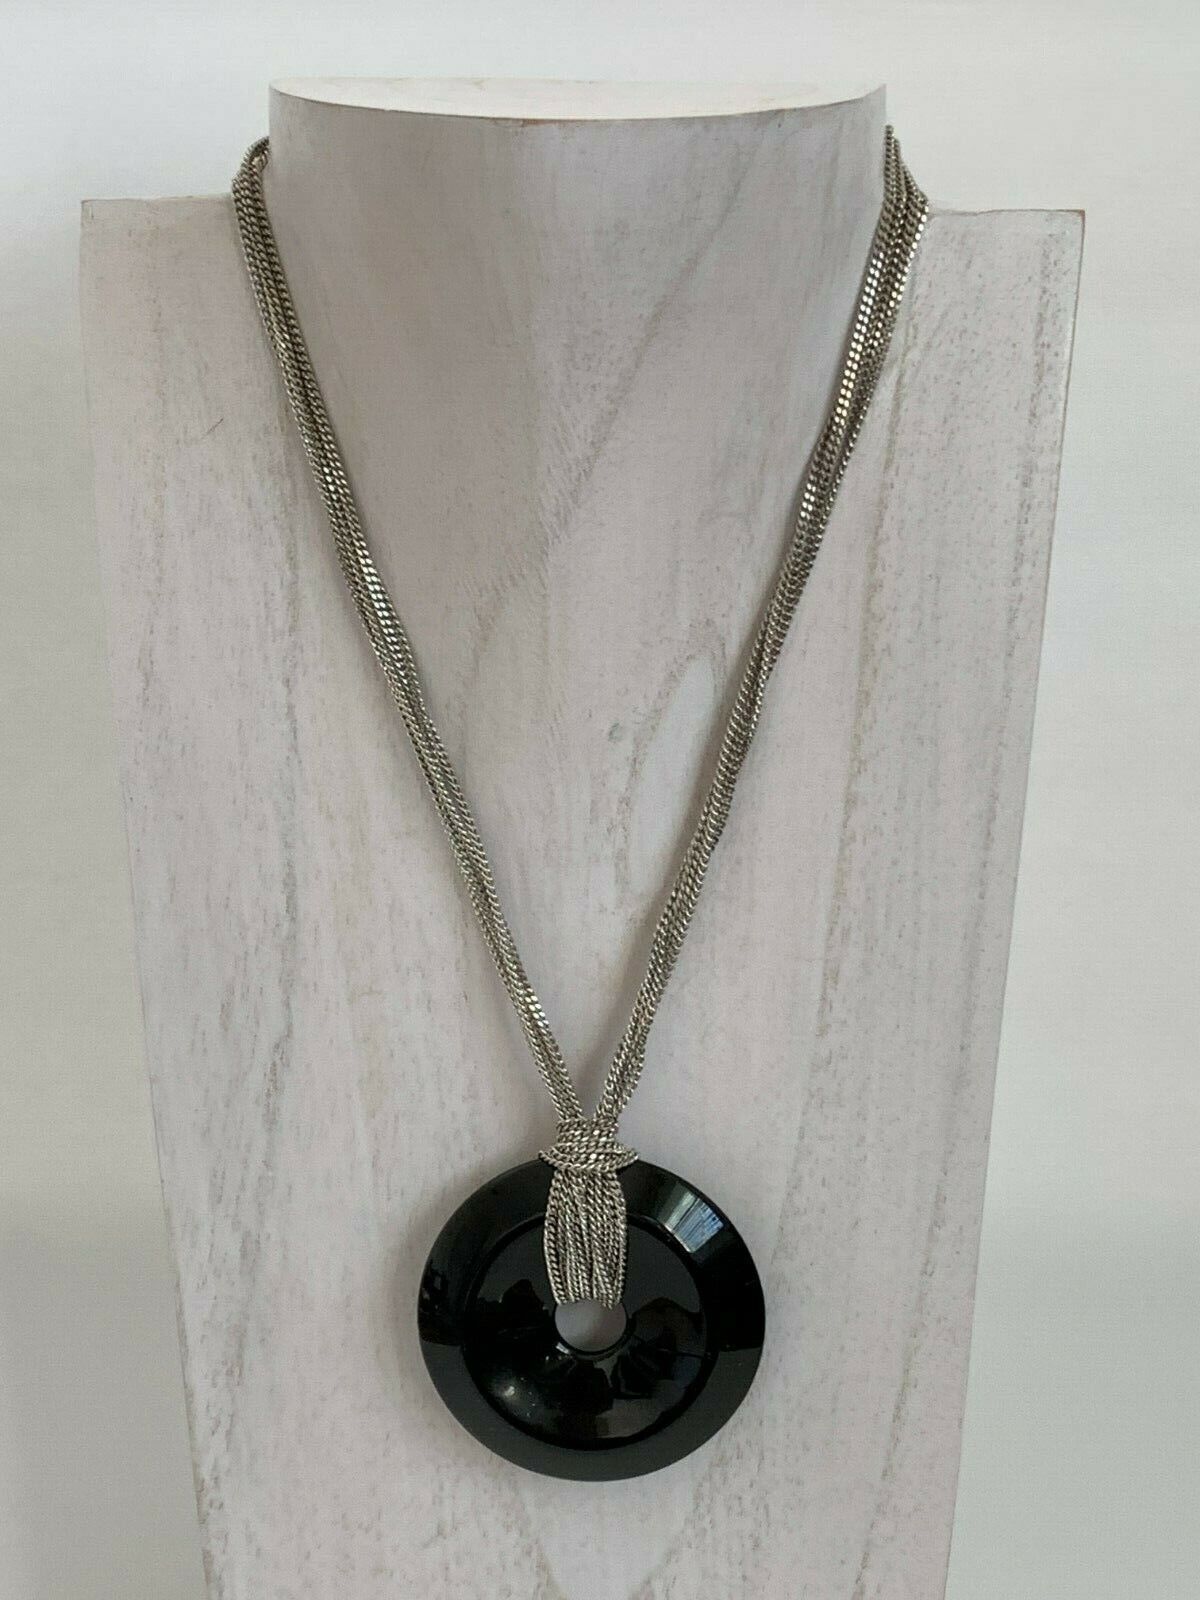 Baccarat B Spirit Large Black Disc Crystal Pendant Necklace with Sterling Chains - $345.51